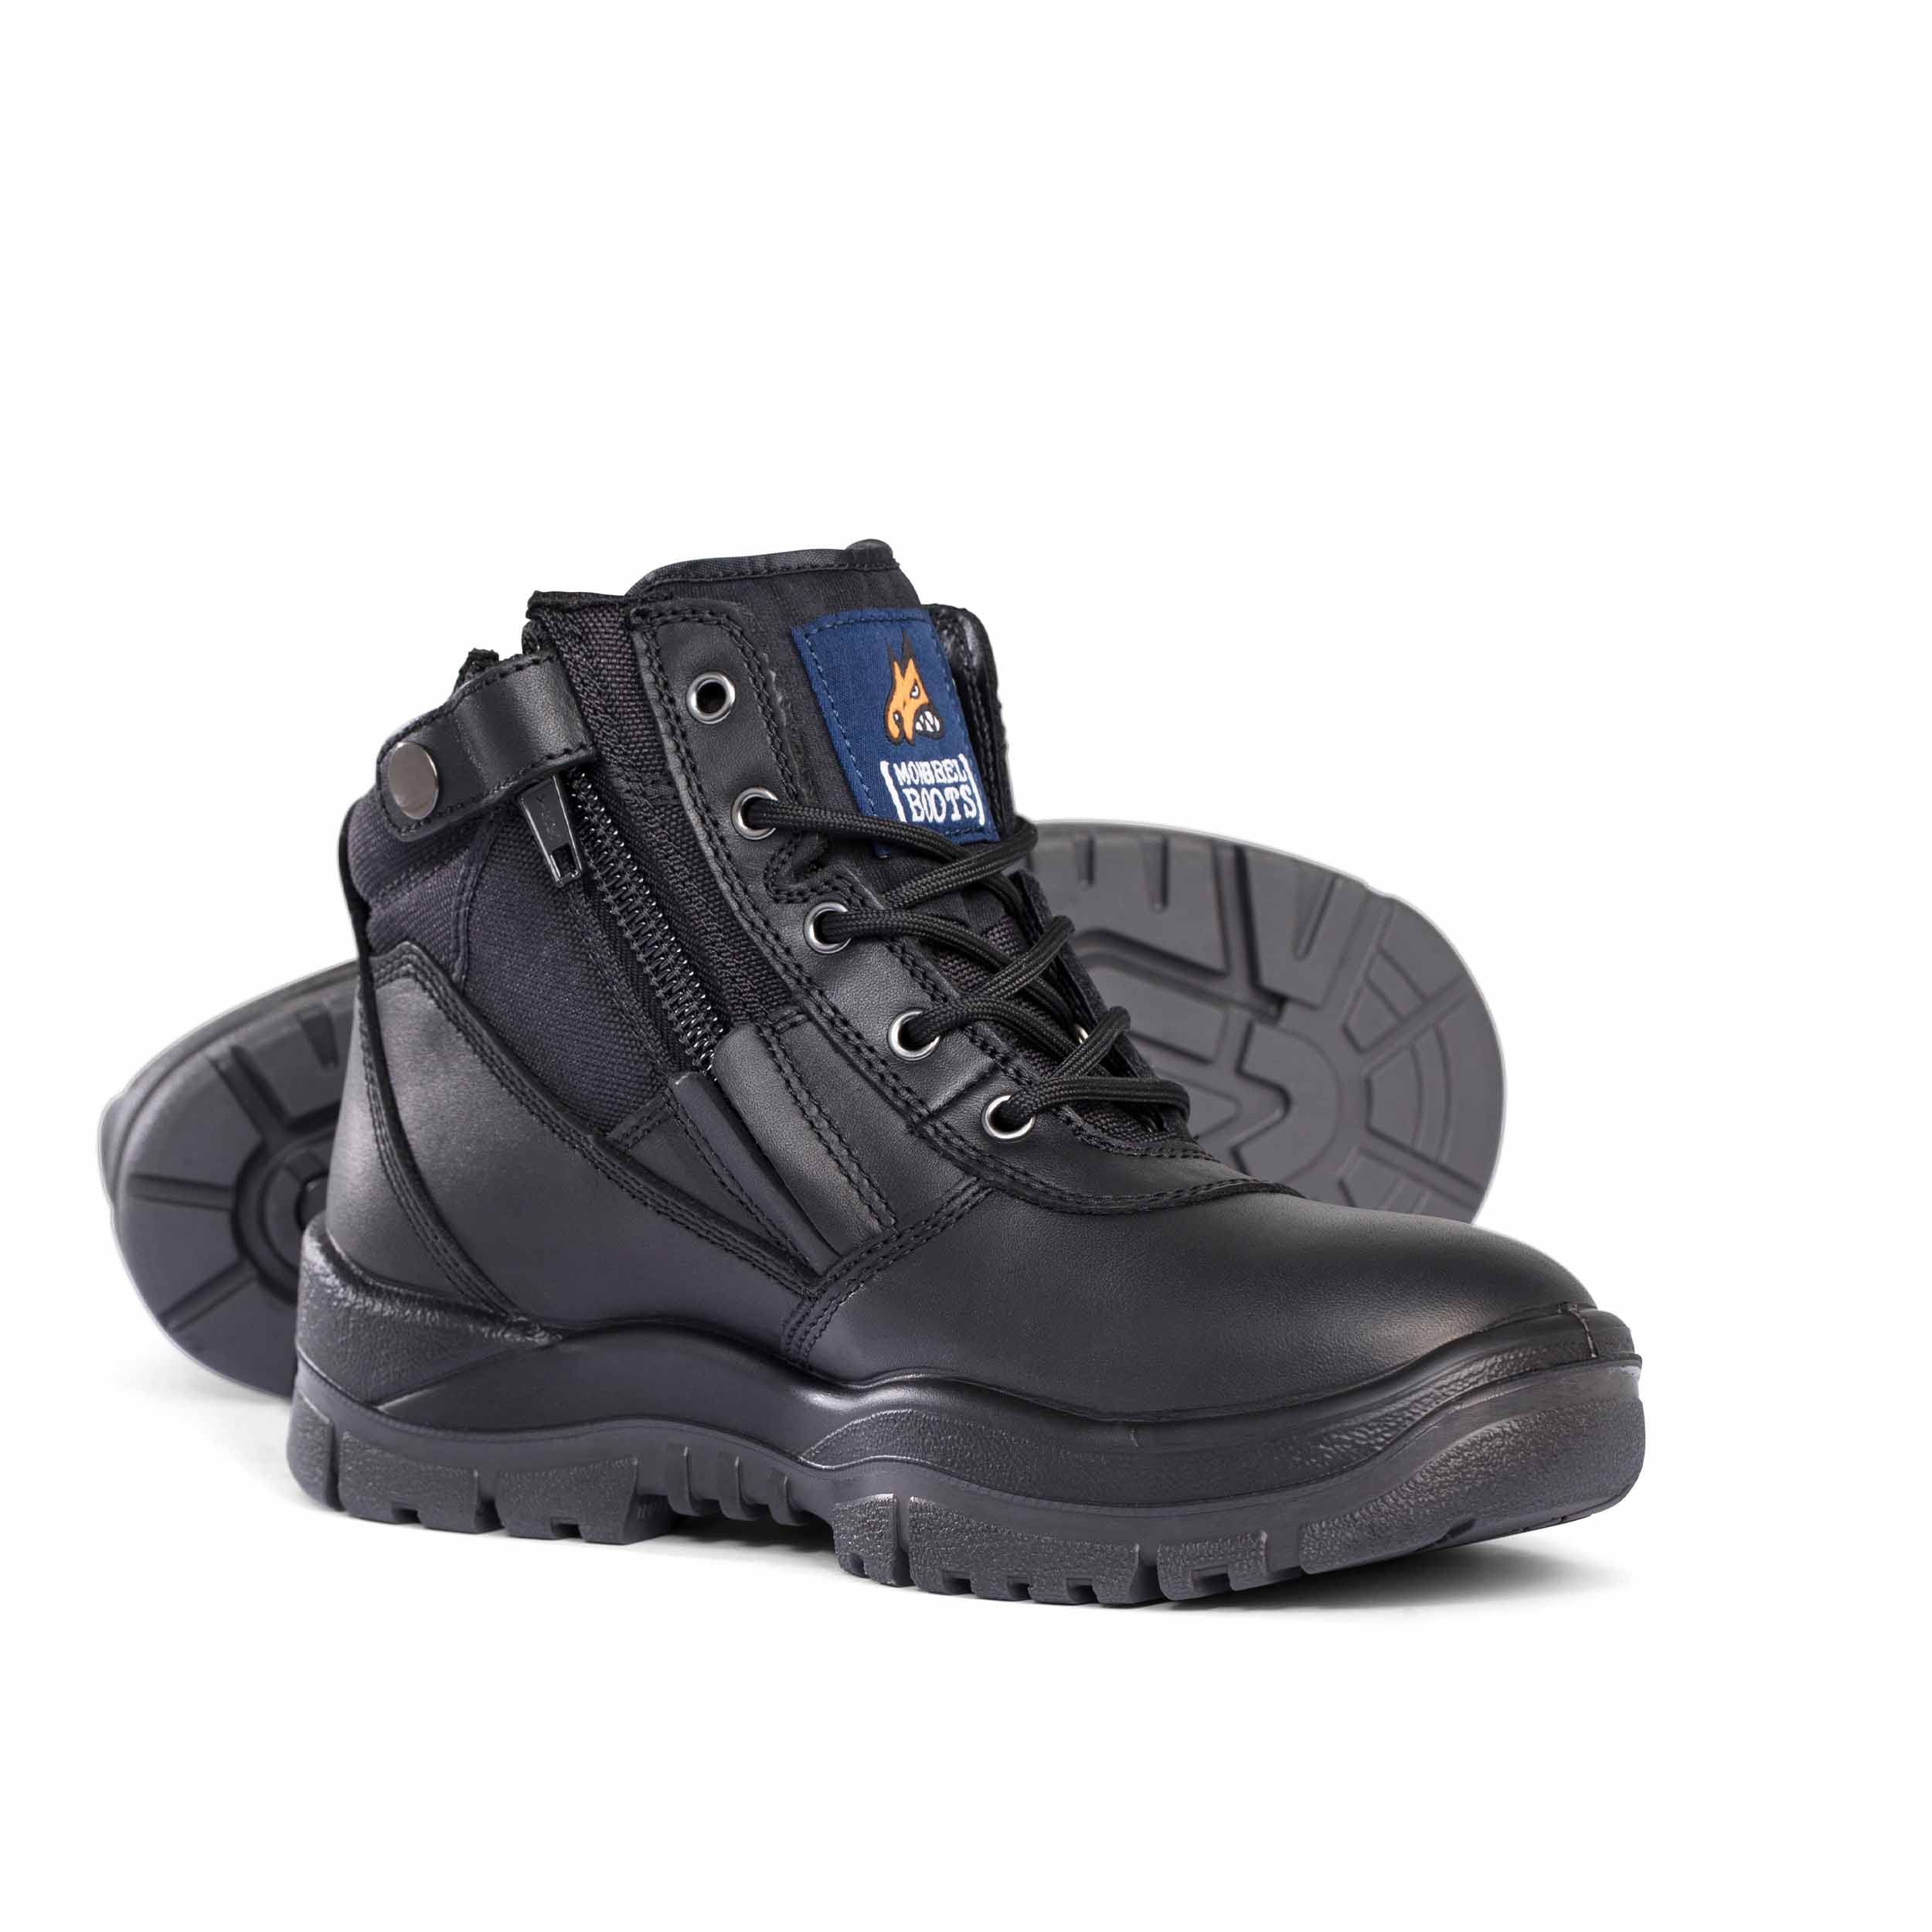 NON-SAFETY ZIPSIDER BOOT